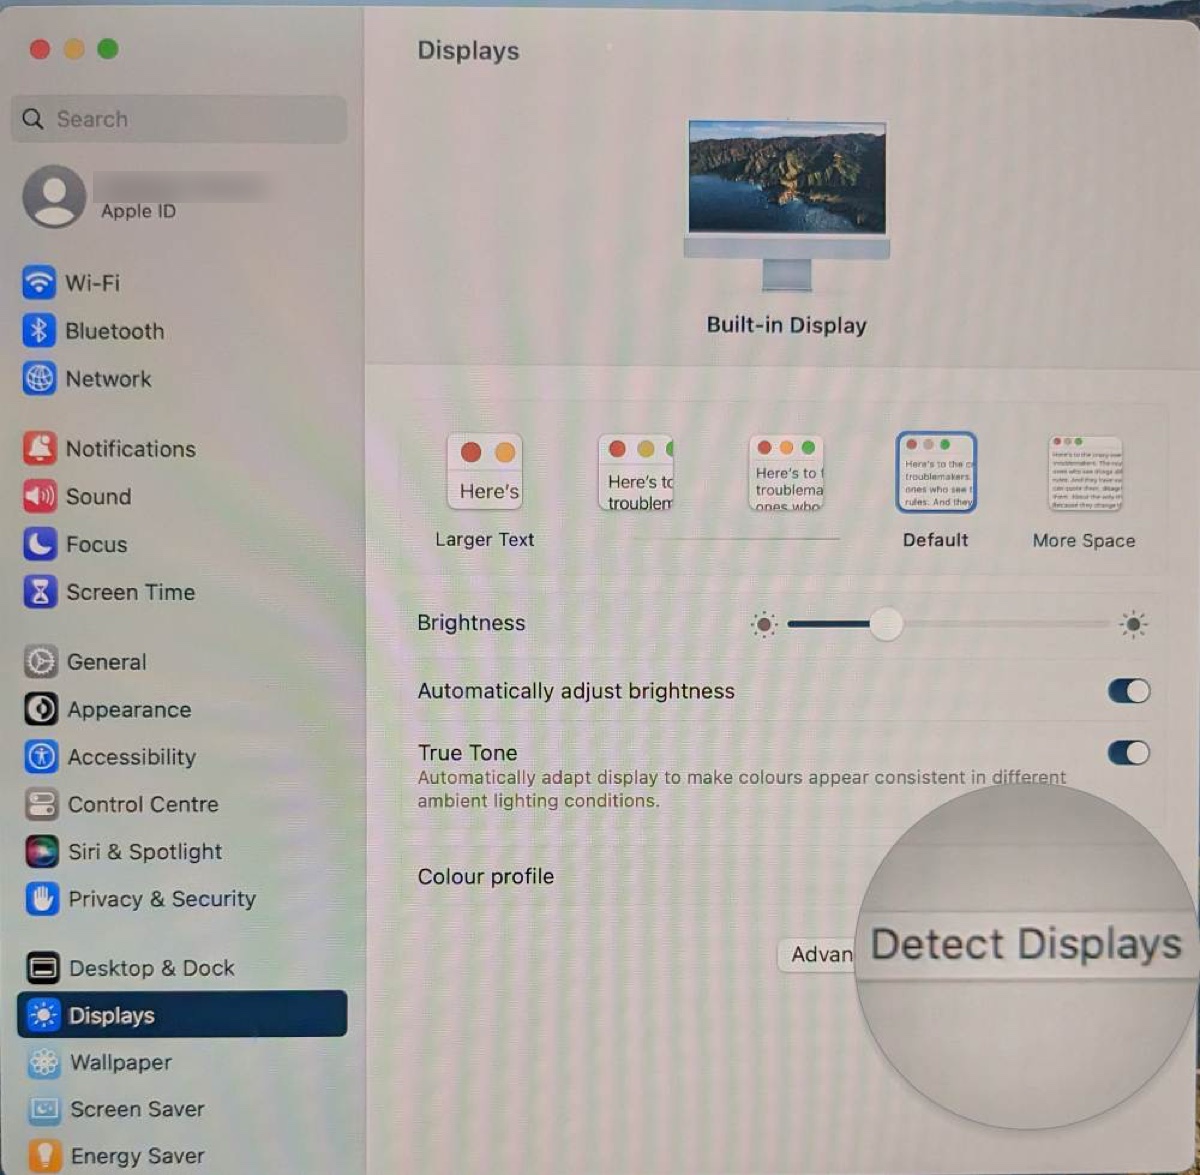 Click the Detect Displays button on Mac